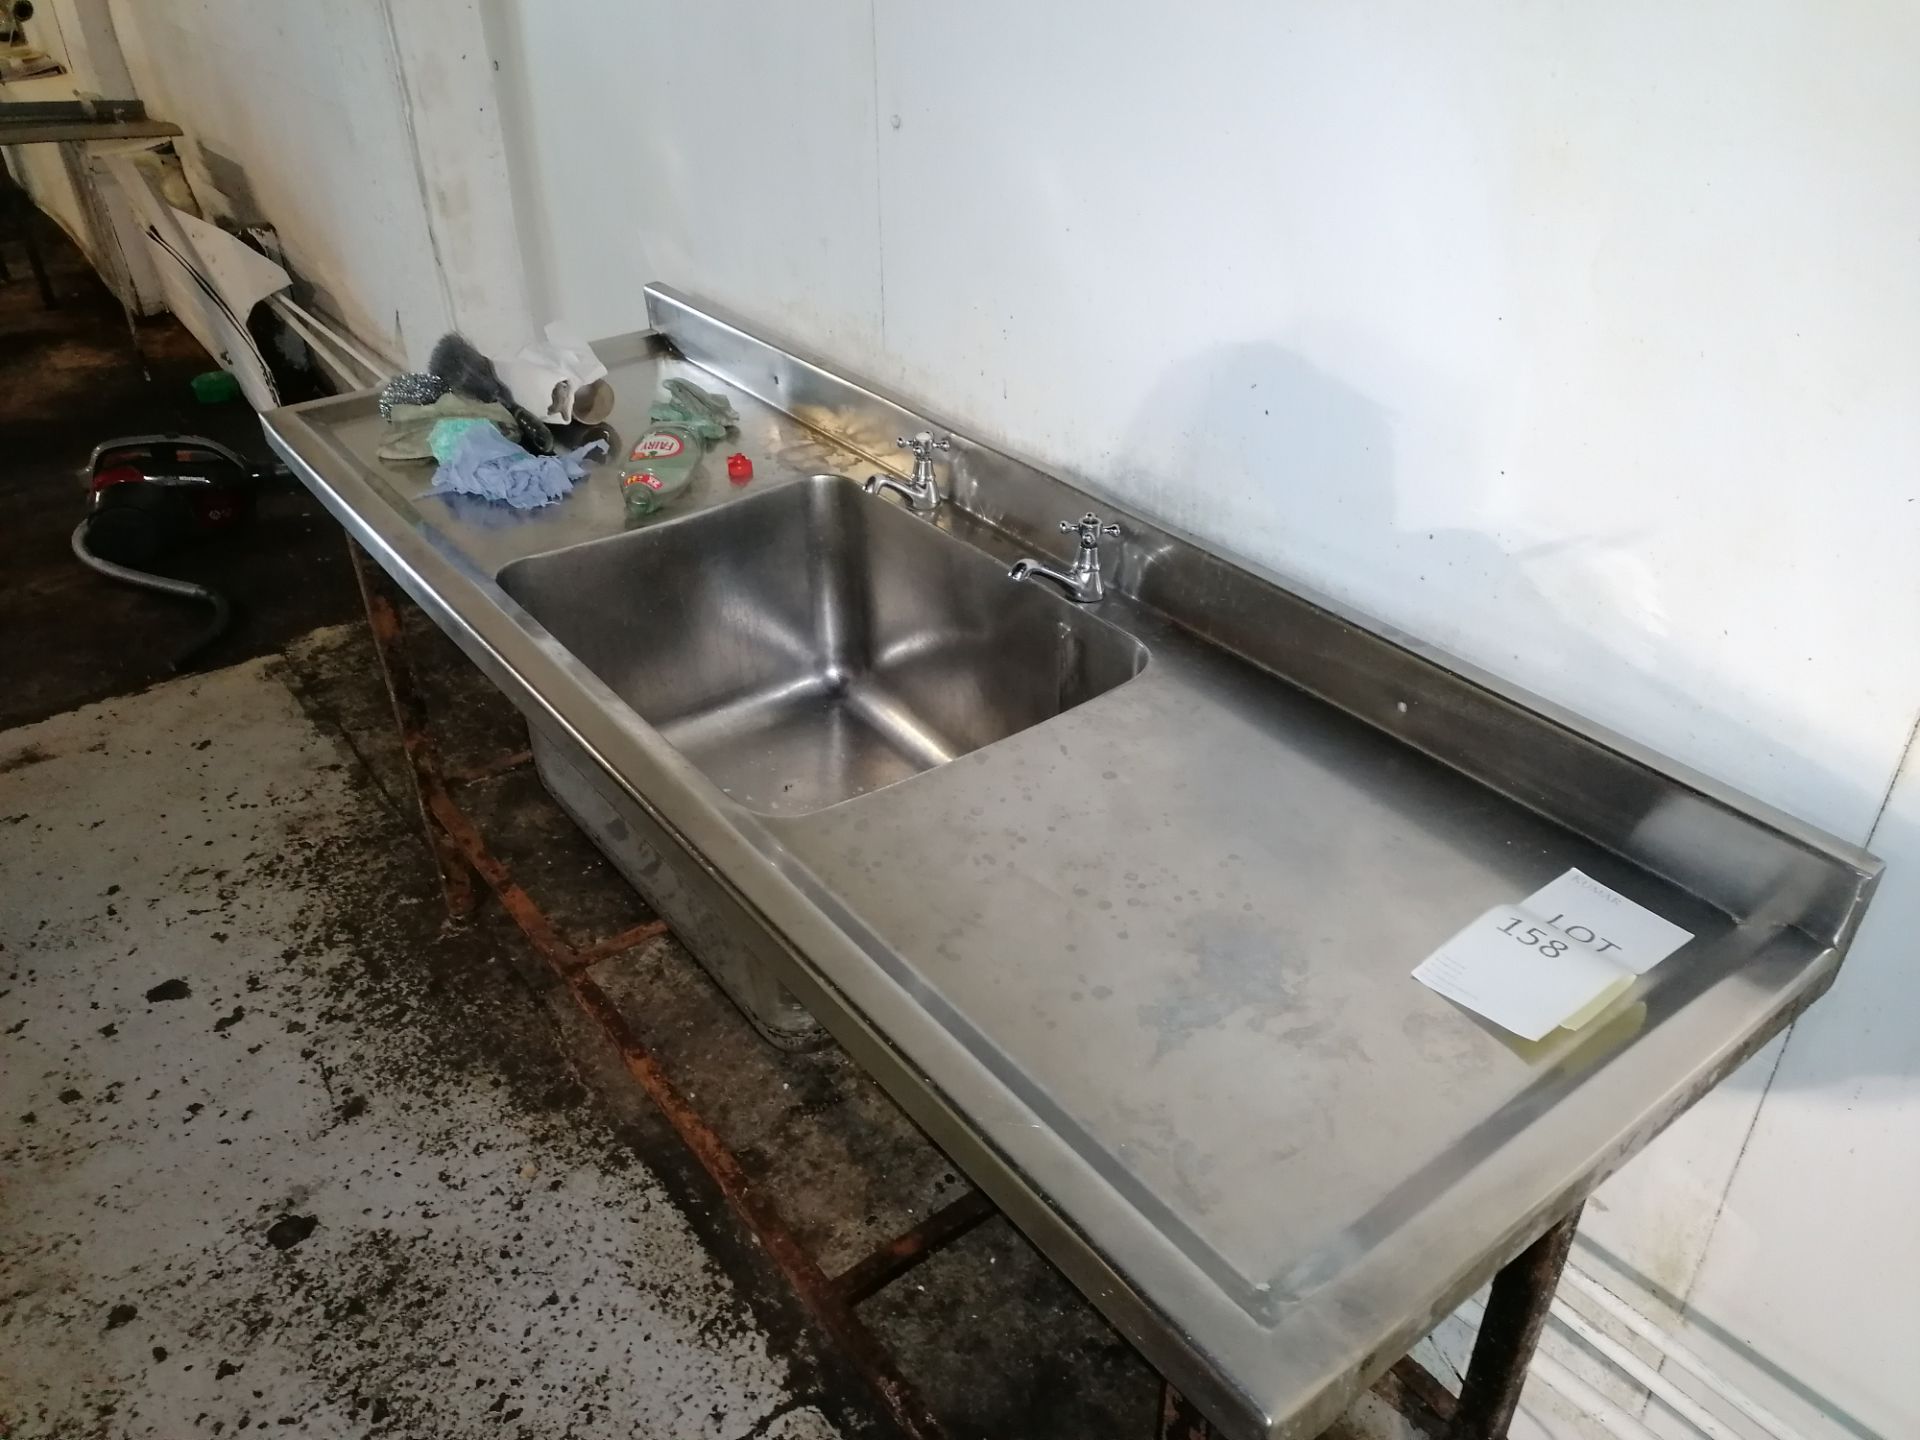 Stainless Steel Twin Drainer Sink Unit With Taps Length 182cm x Width 60cm x Height 86cm - Image 4 of 4